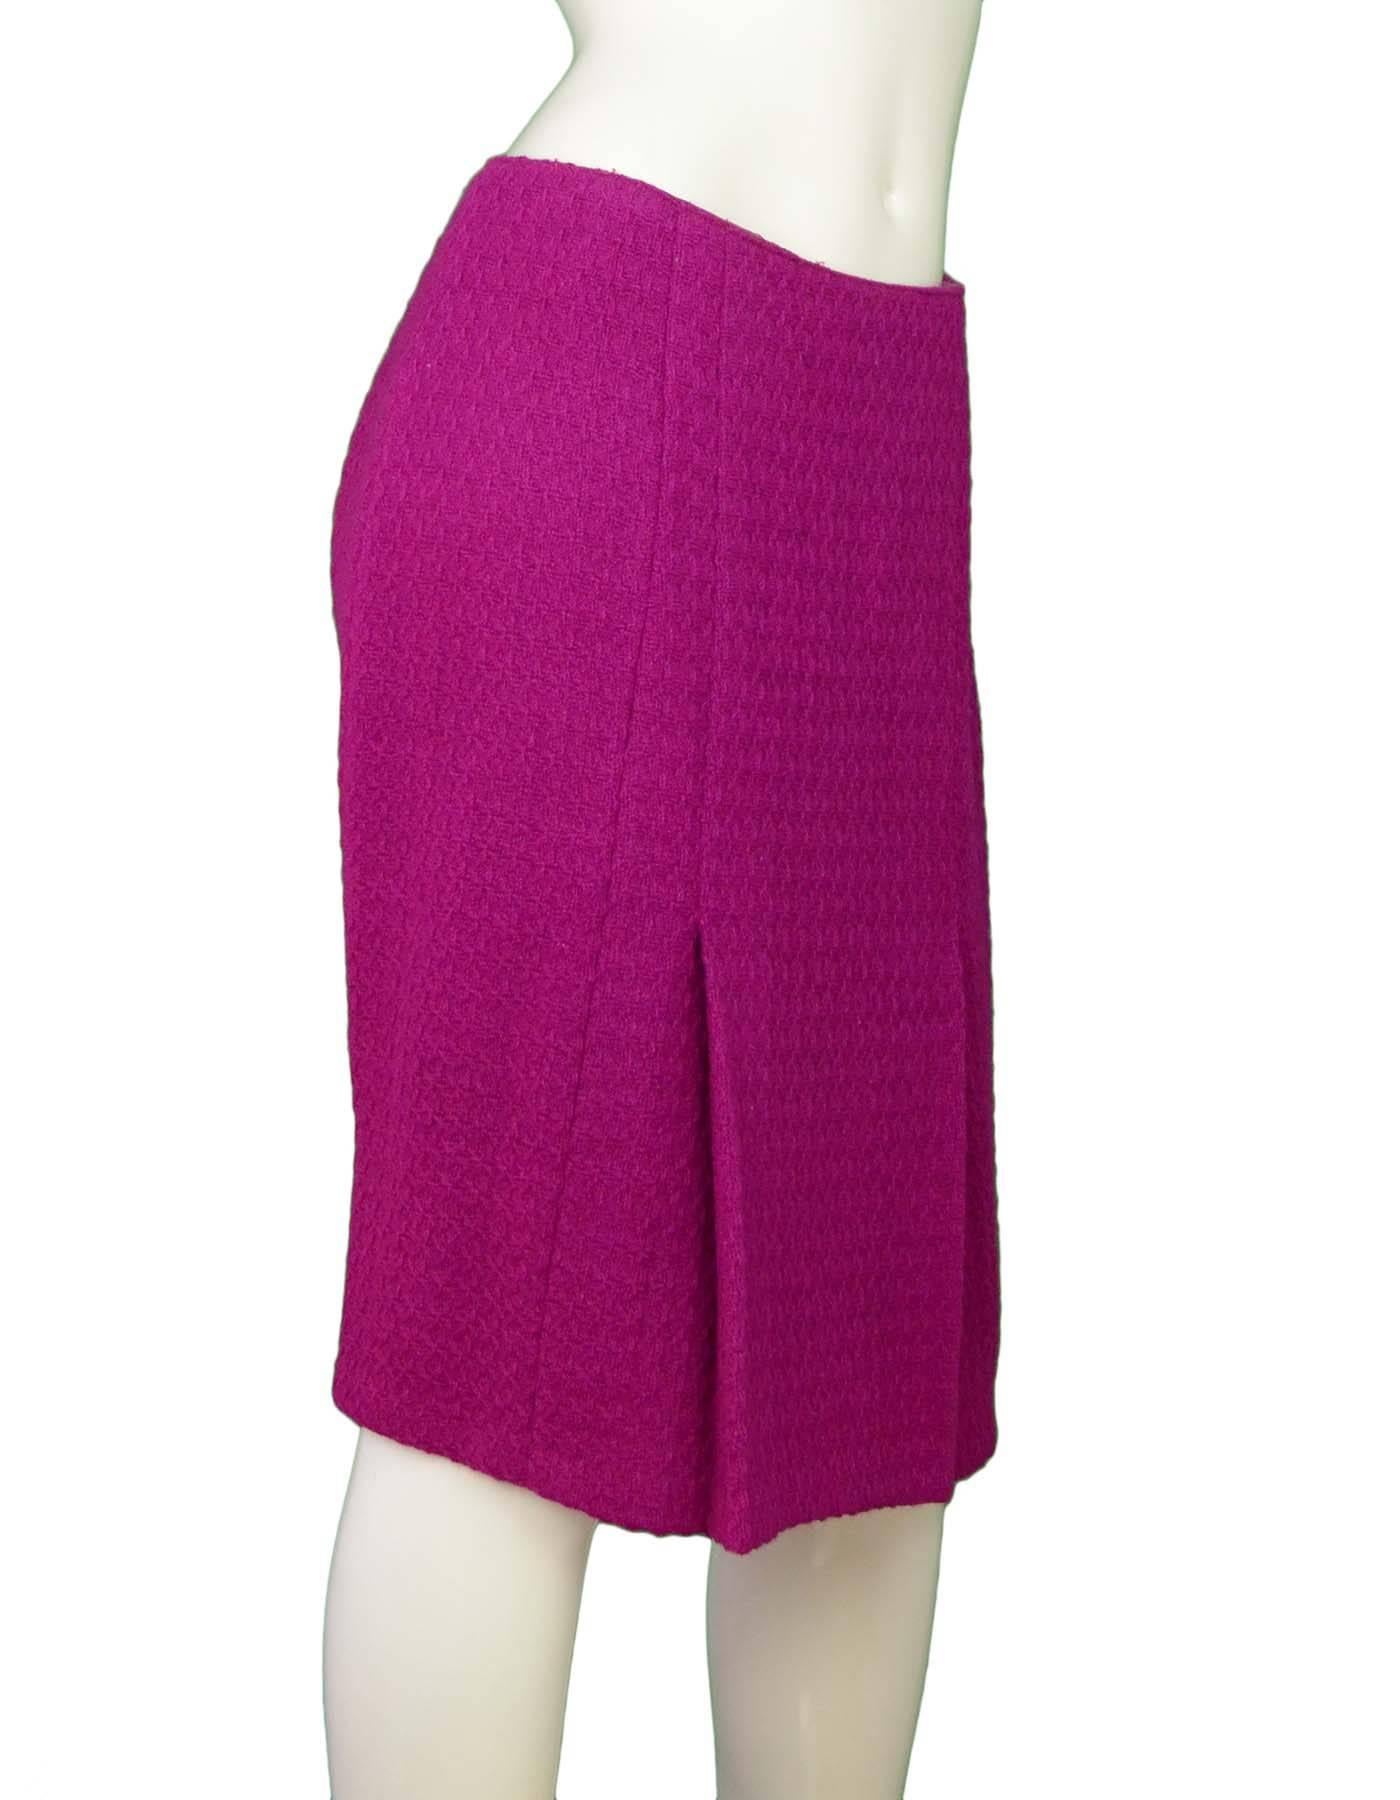 Chanel Fuchsia Skirt with Inverted Pleats

Color: Fuchsia
Composition: Not listed, believed to be wool
Lining: Fuchsia textile
Closure/Opening: Back zip closure
Exterior Pockets: None
Interior Pockets: None
Overall Condition: Excellent